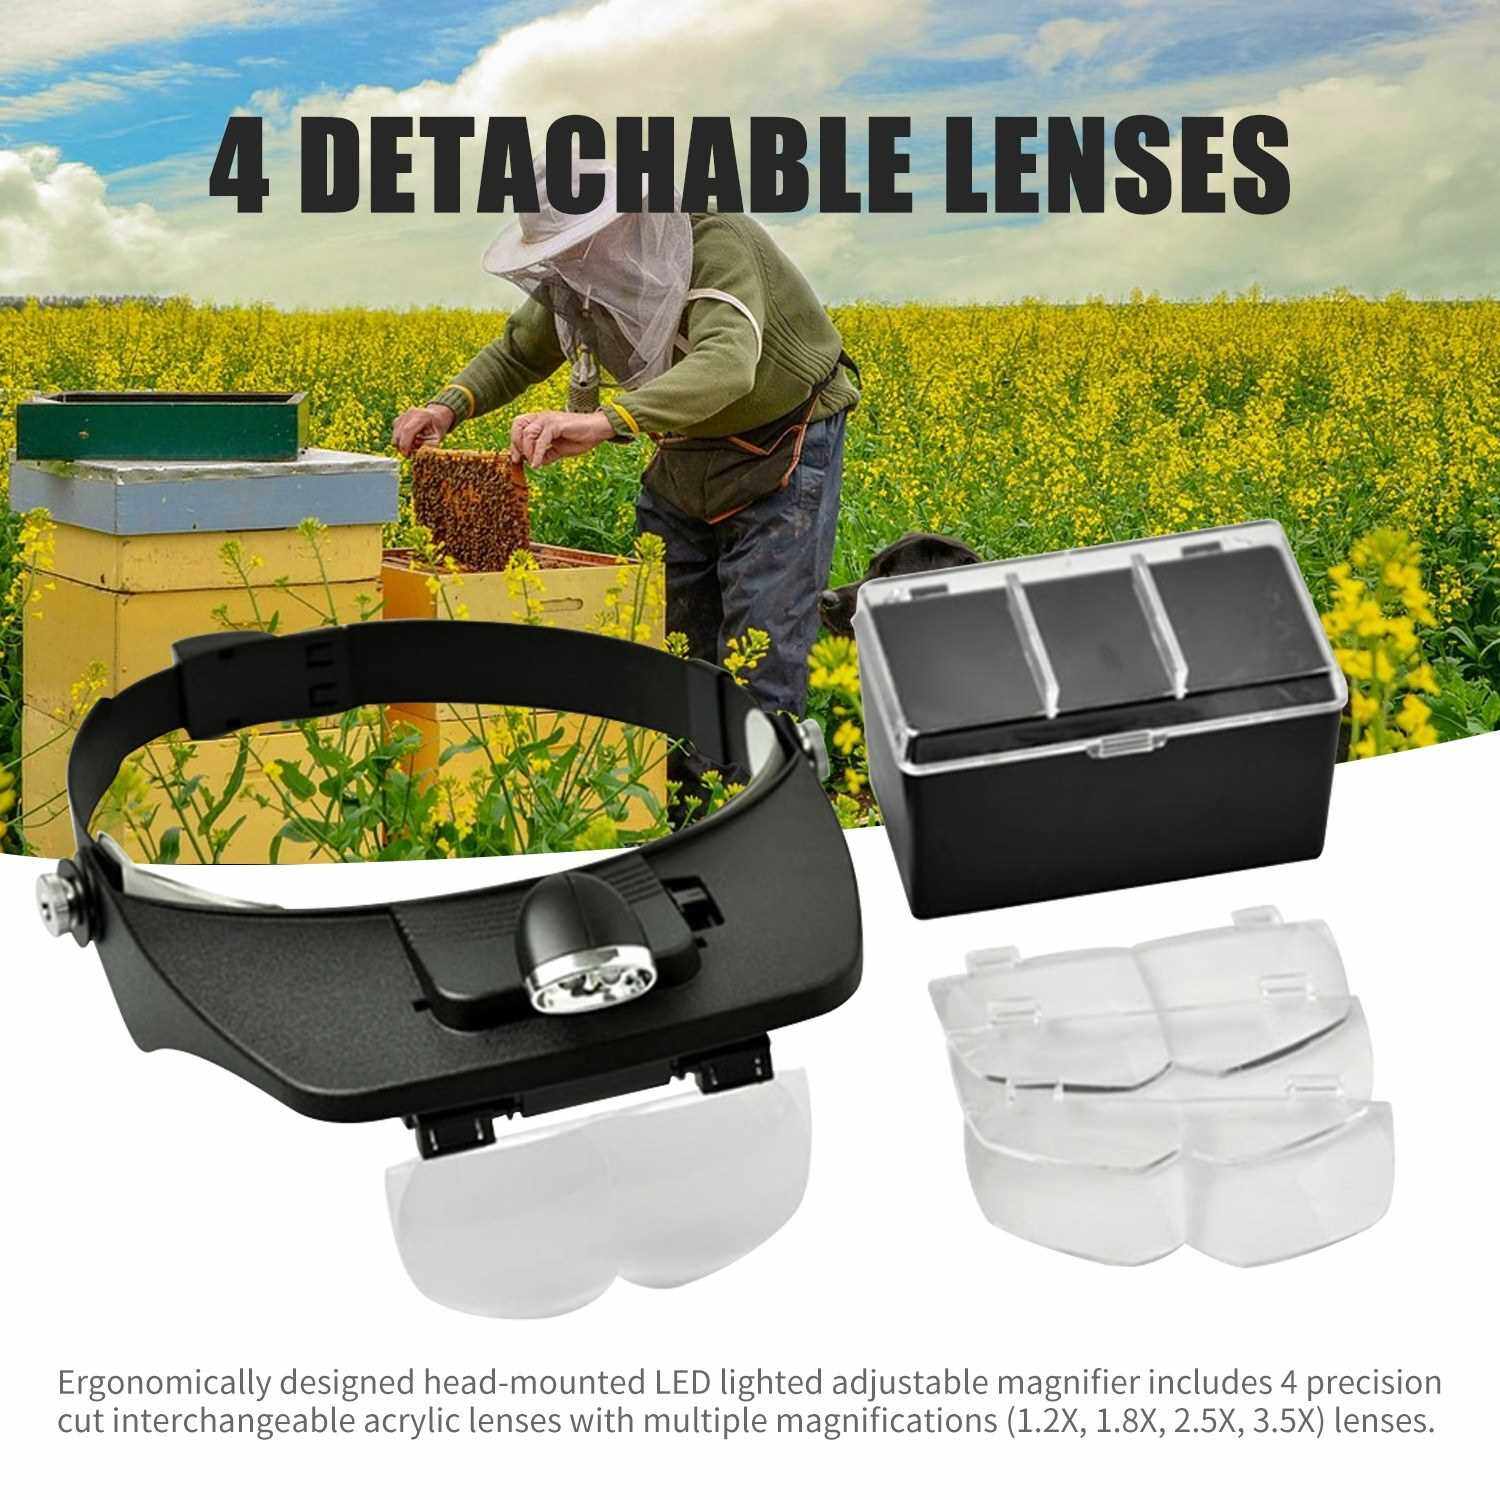 Headband Magnifier Head Magnifying Glasses Hands-Free Optical Professional Head-Worn LED Lighted Magnifier with 4 Detachable Lenses 1.2X 1.8X 2.5X 3.5X for Sewing Crafts Reading (Standard)